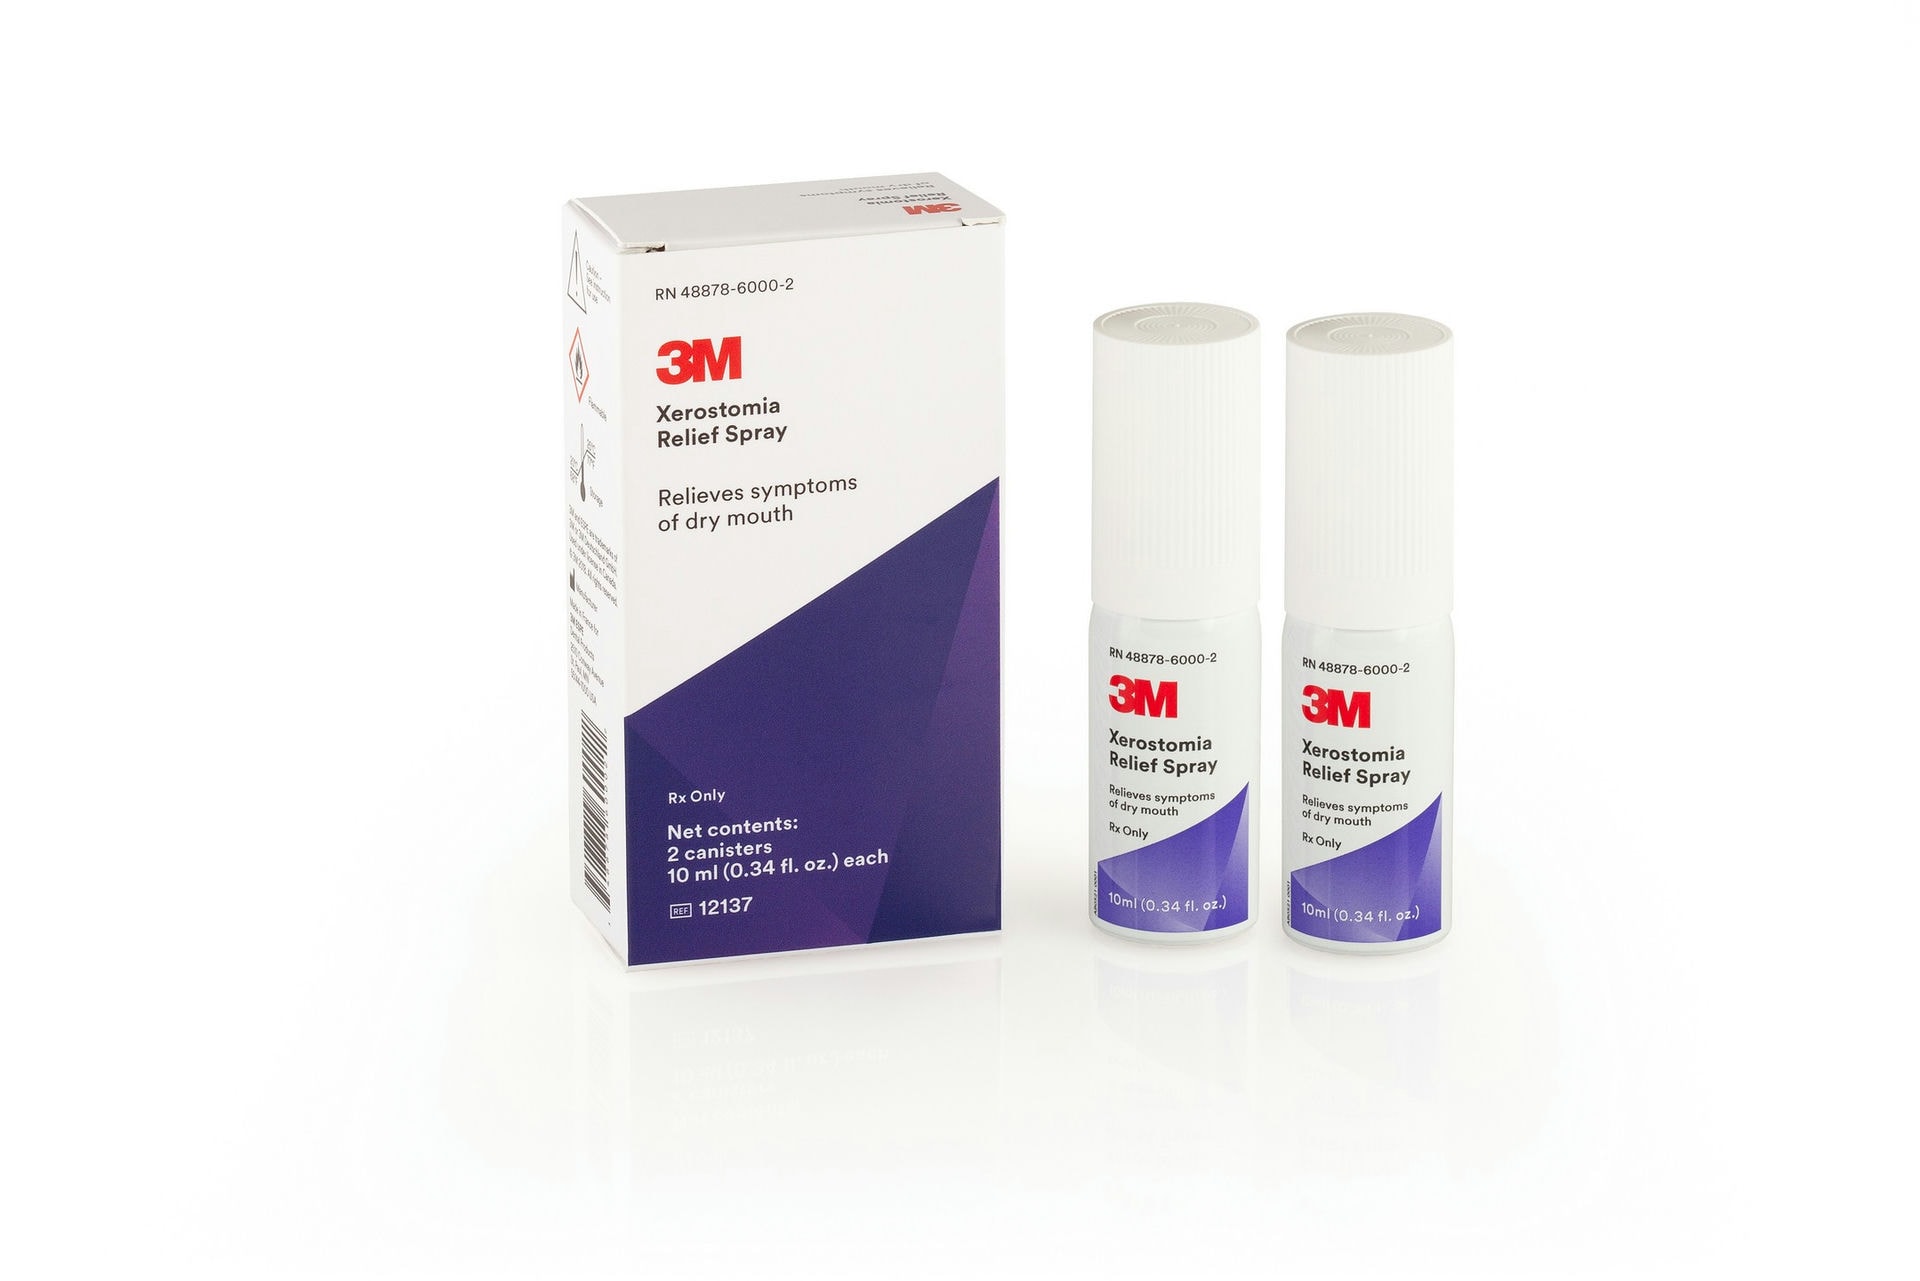 Product image of Xerostomia Relief Spray from 3M.